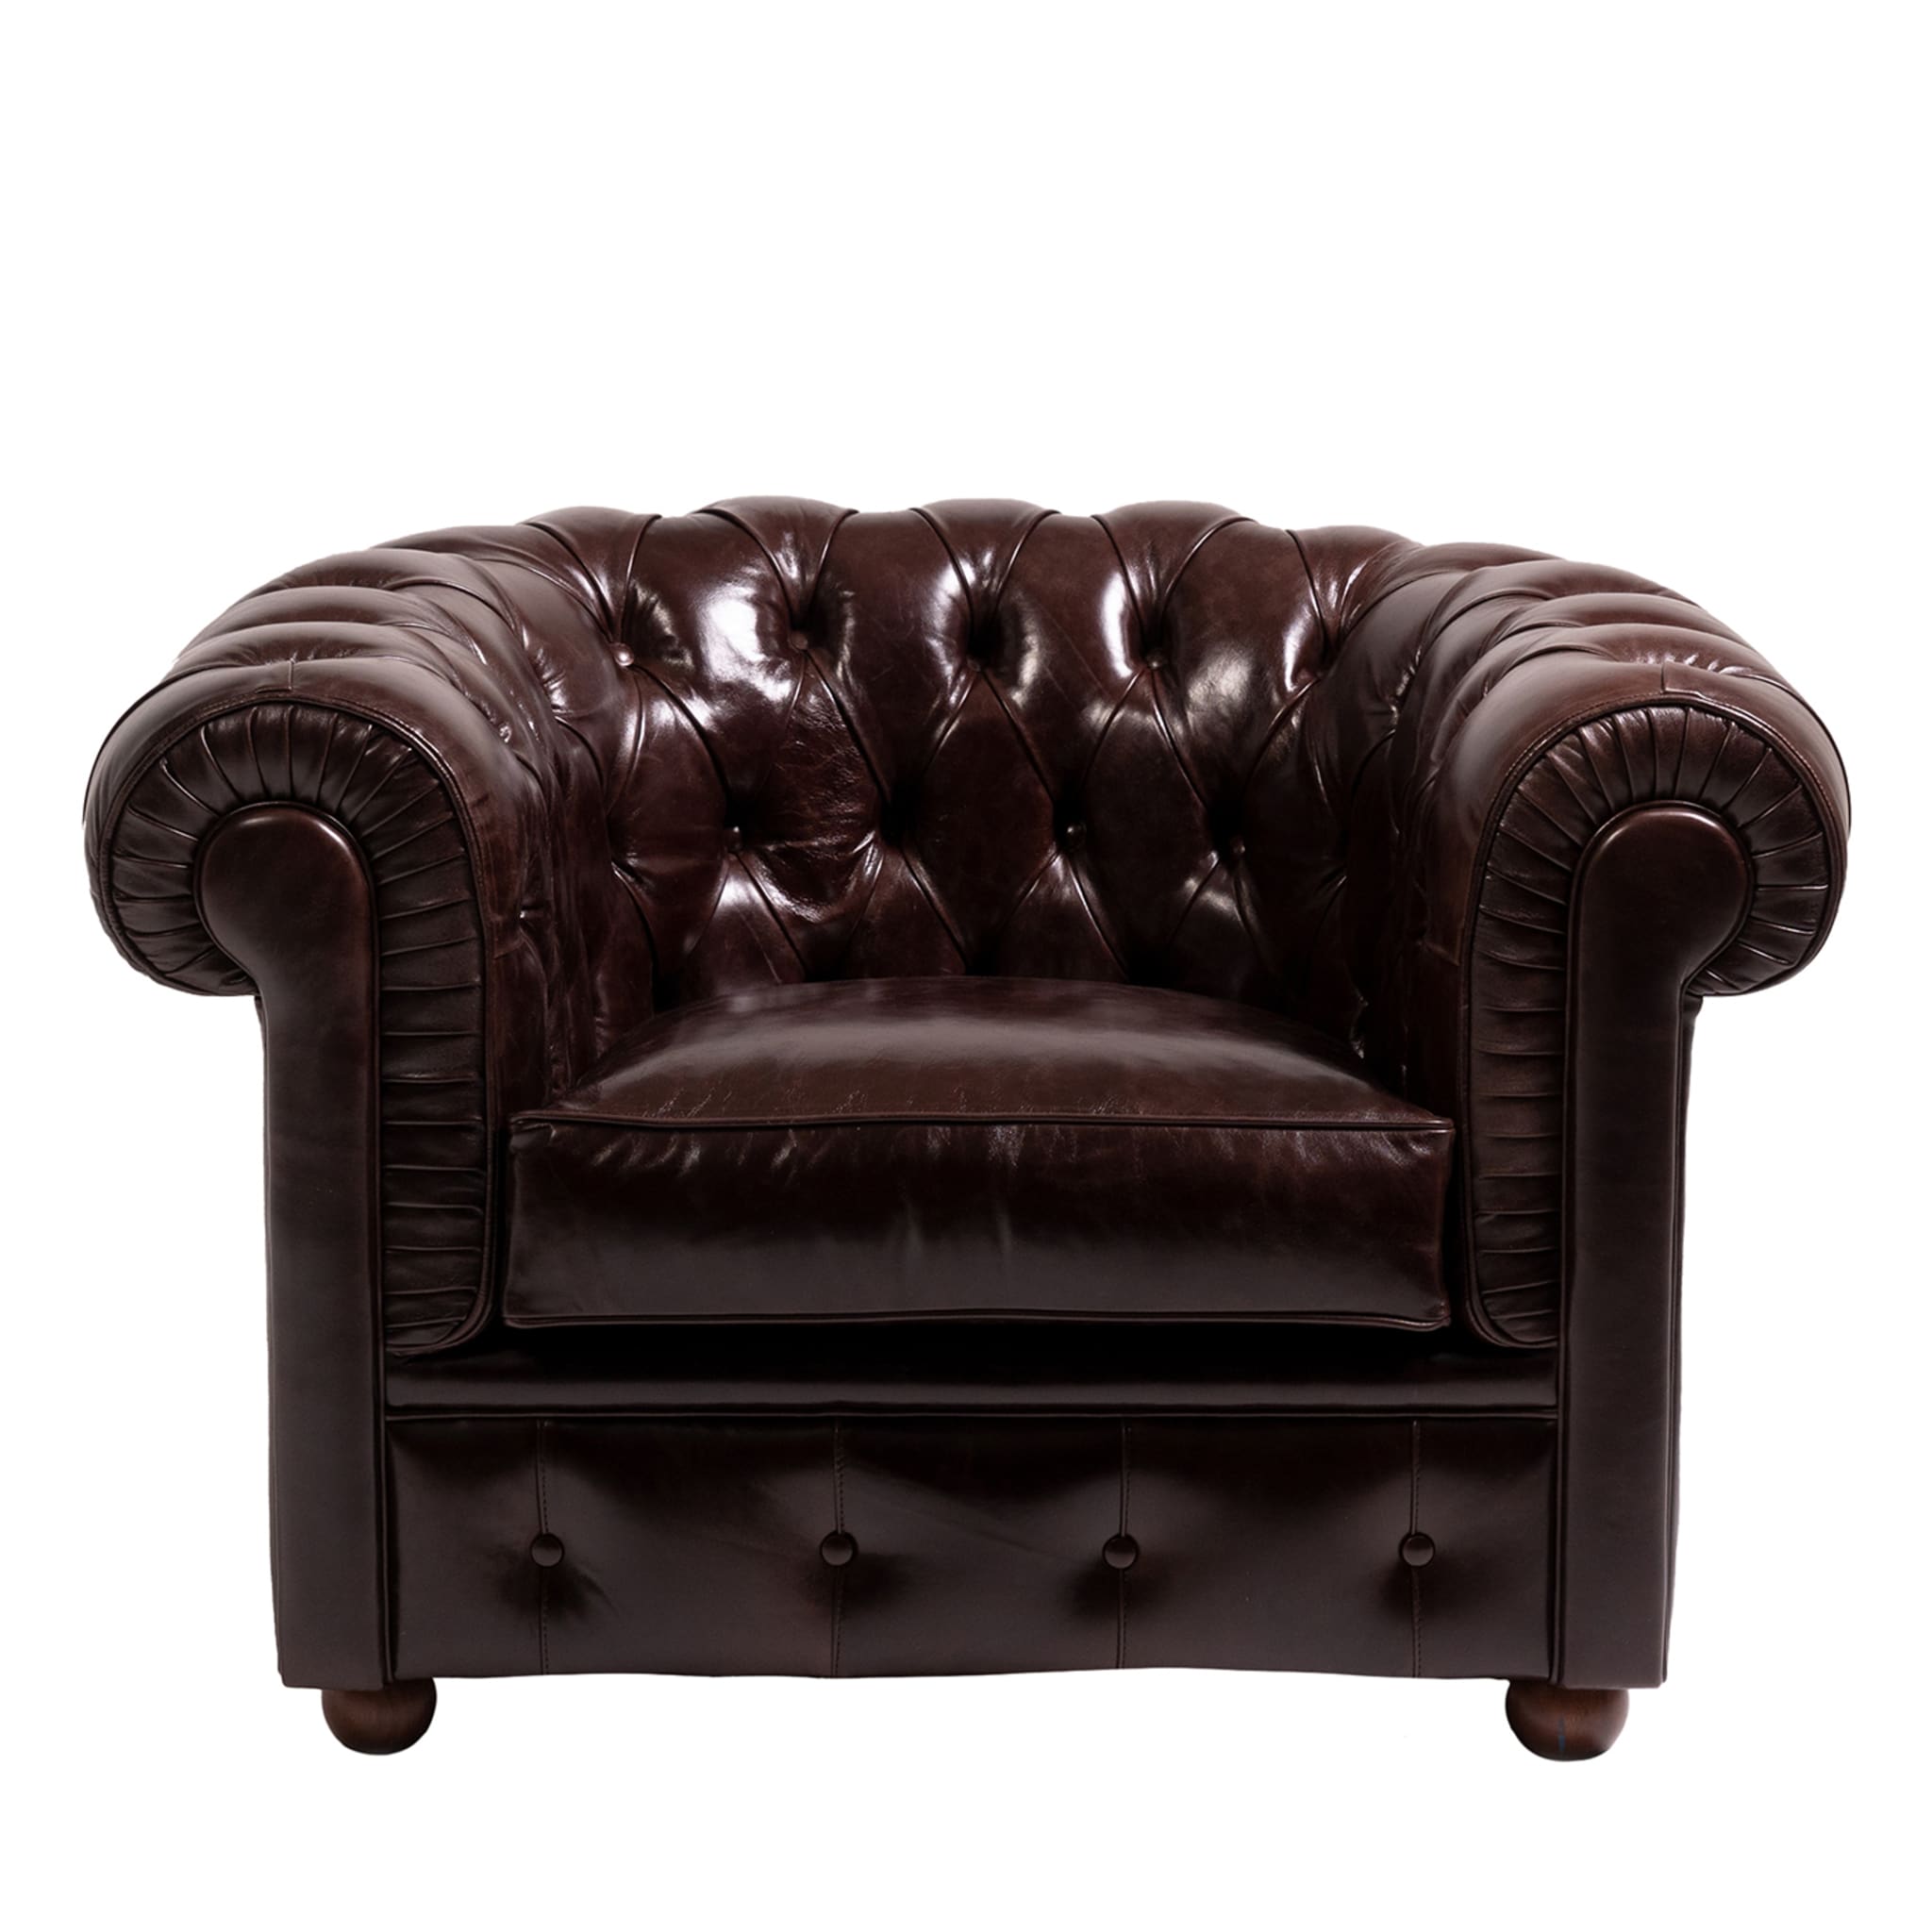 Chesterfield Brown Leather Armchair - Main view